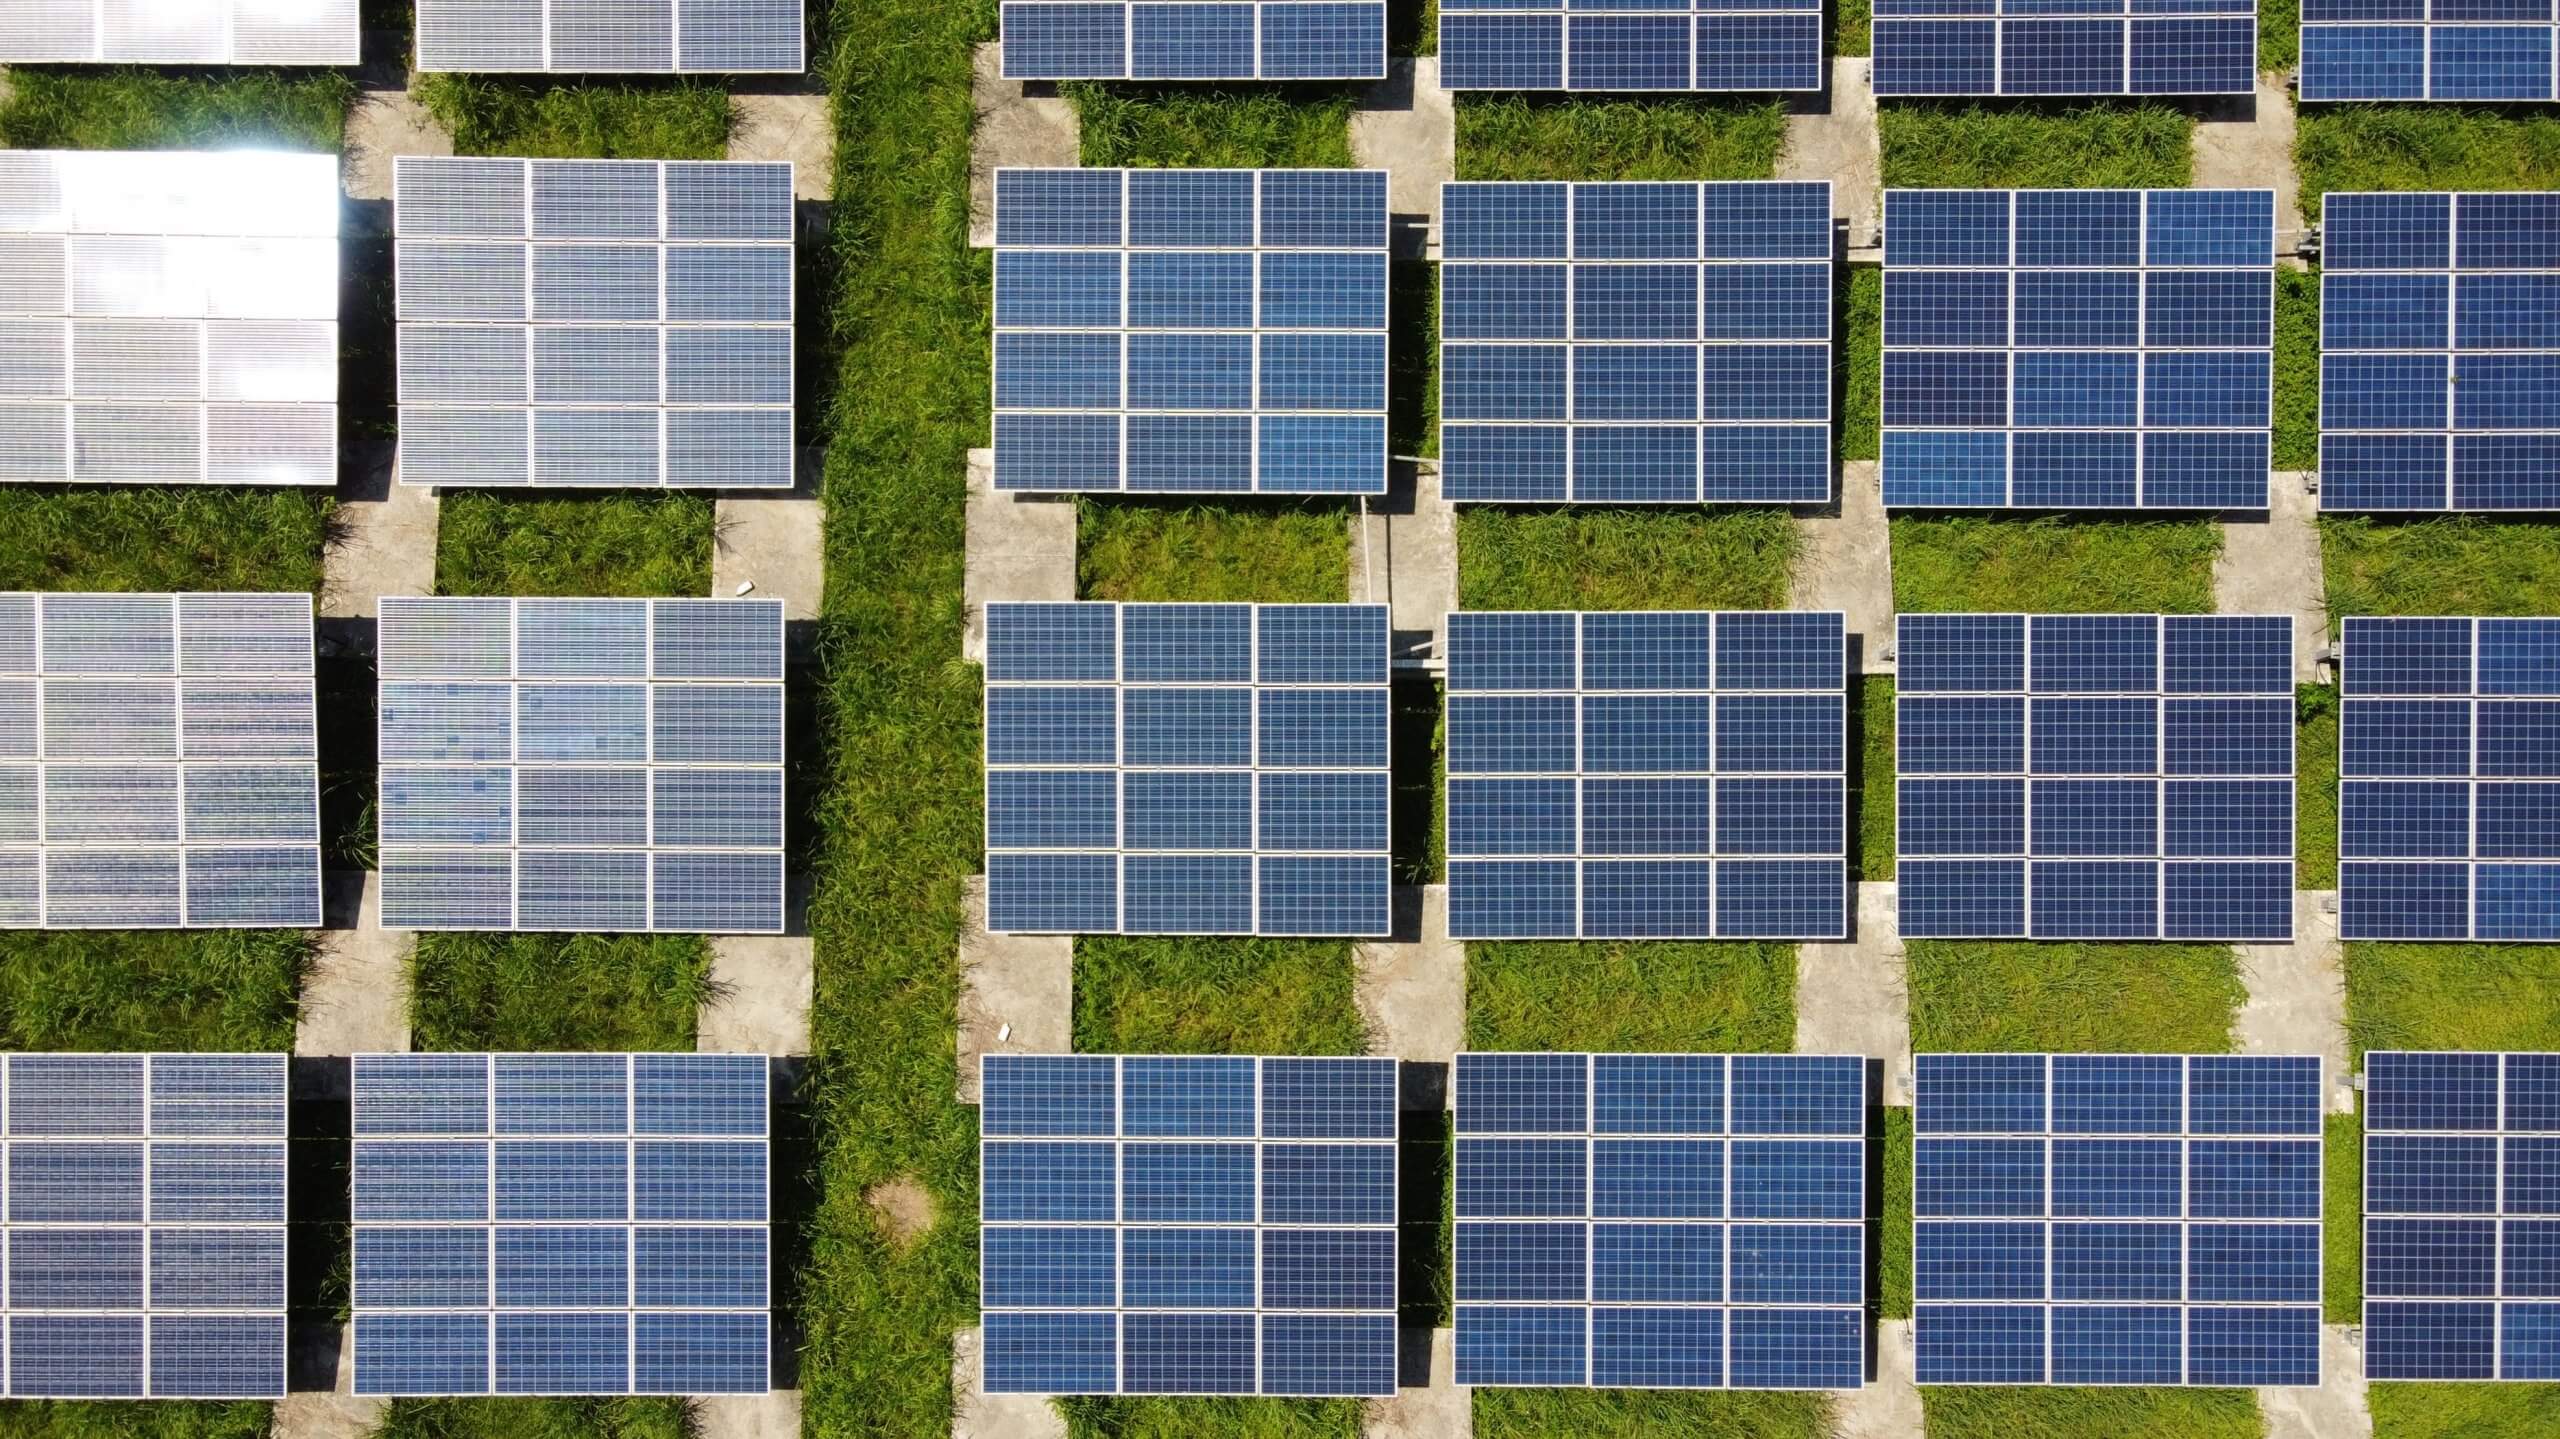 Already in 2015, Israel created price parity in the construction of the infrastructure between terrestrial solar energy and conventional energy. Photo by Anders J on Unsplash